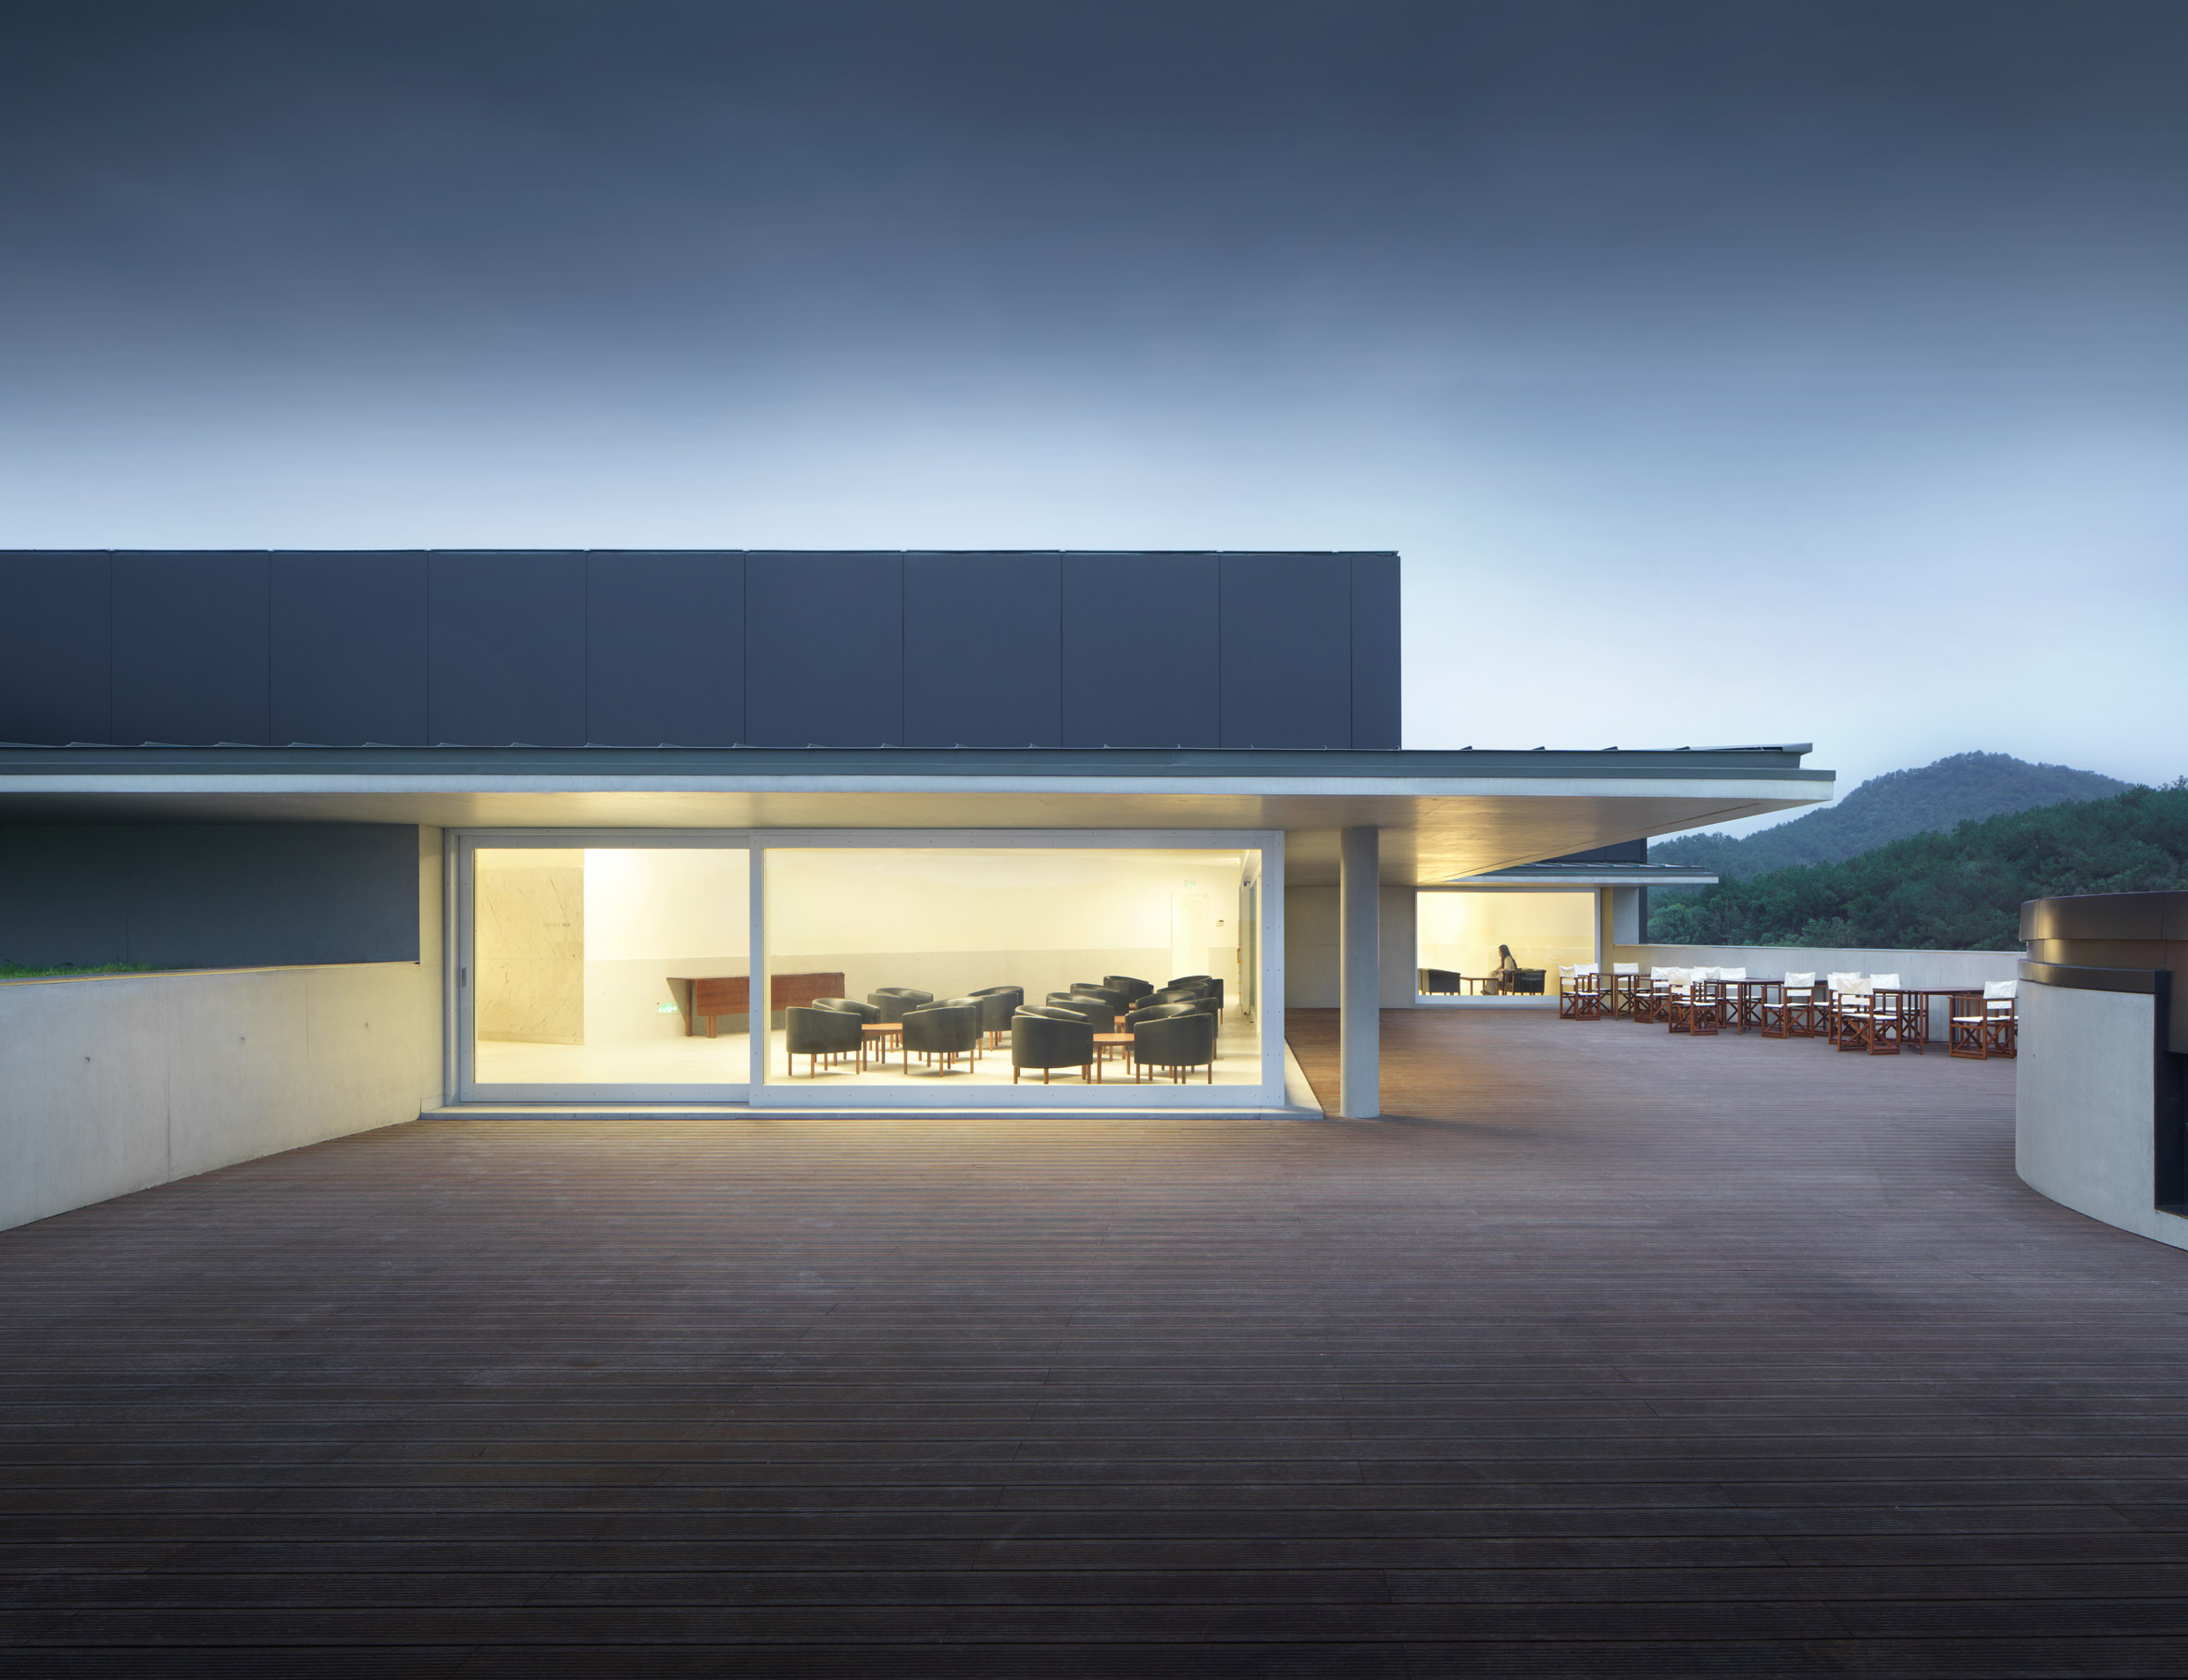 The roof terrace of Huamao Museum of Art and Education by Álvaro Siza and Carlos Castanheira